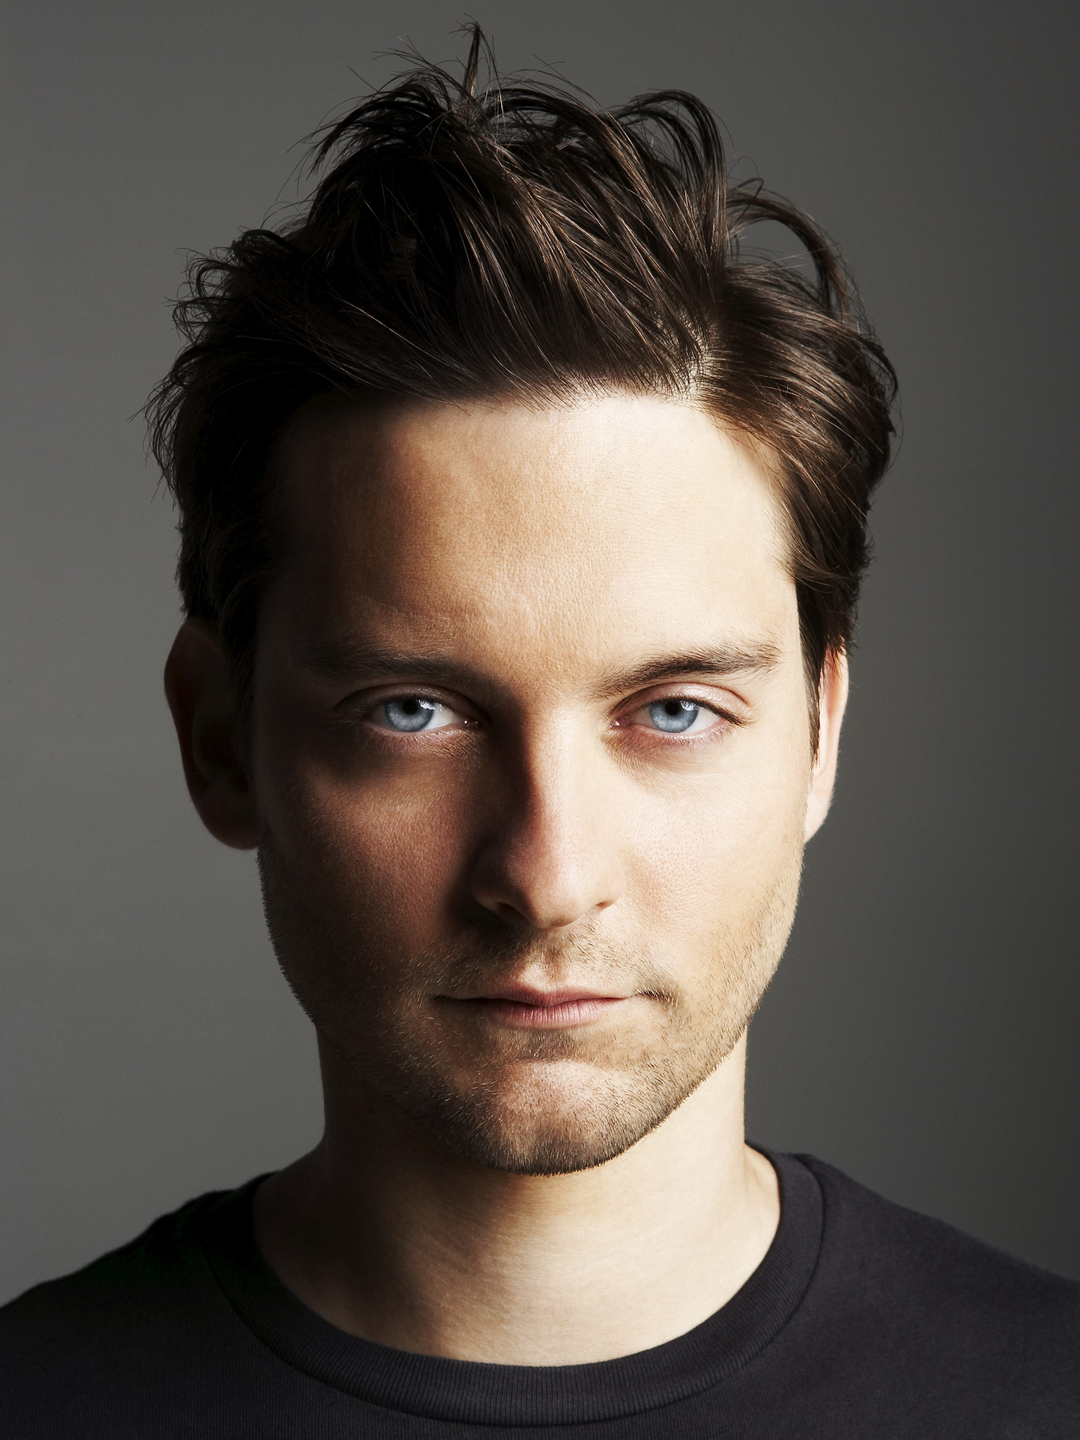 Tobey Maguire in his teens